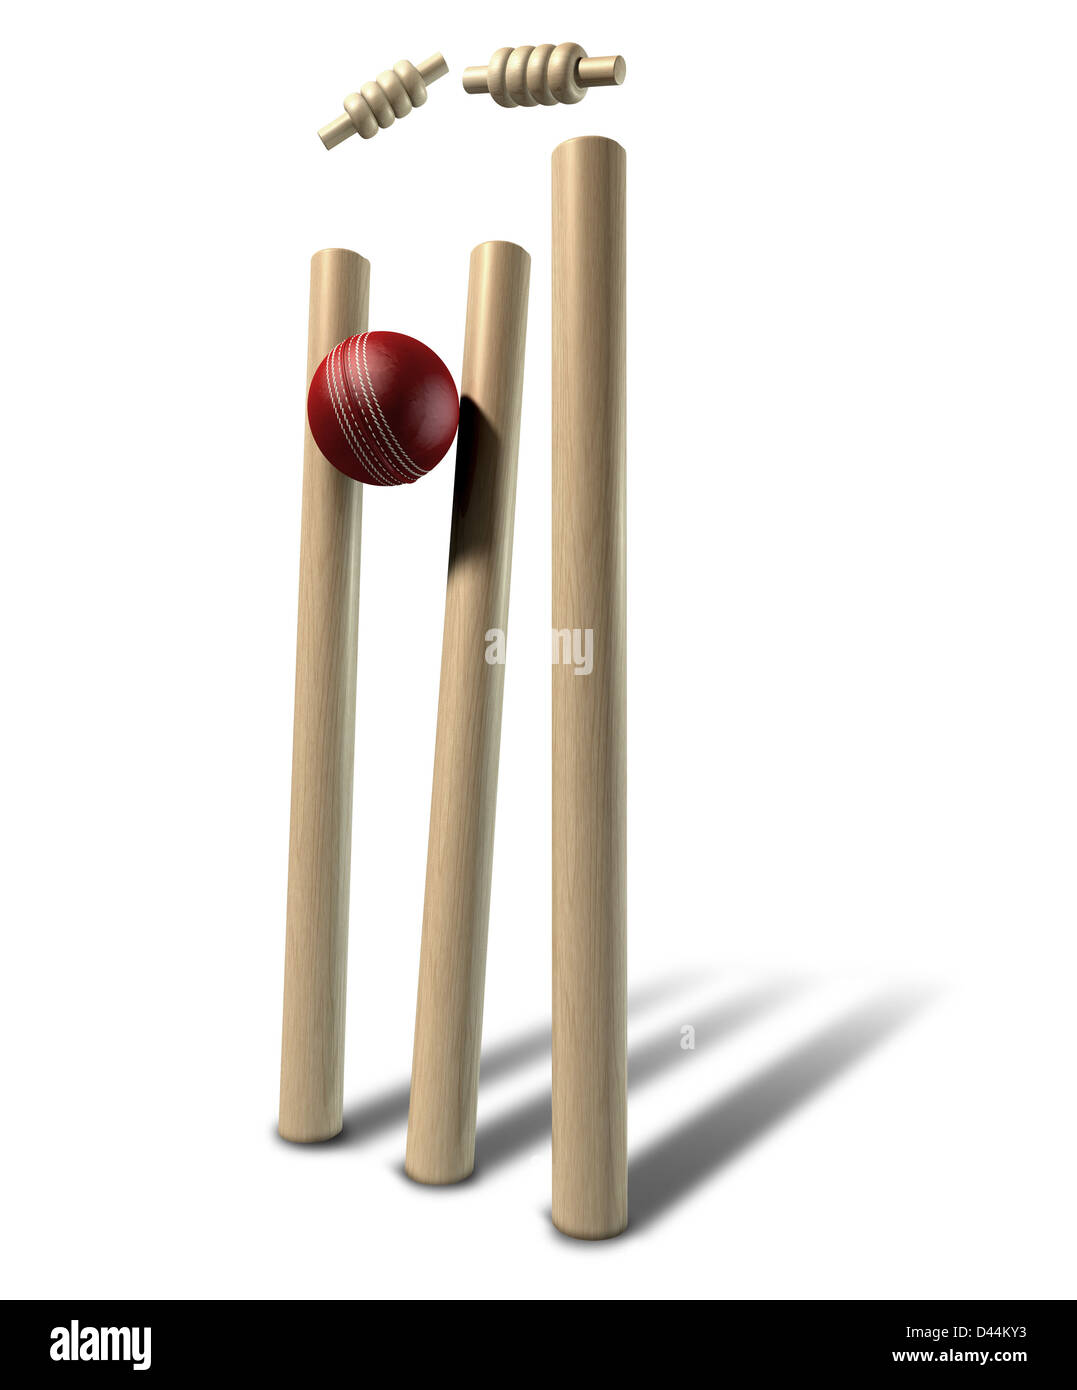 A red leather cricket ball striking and unsettling wooden cricket wickets and bails on an isolated background Stock Photo